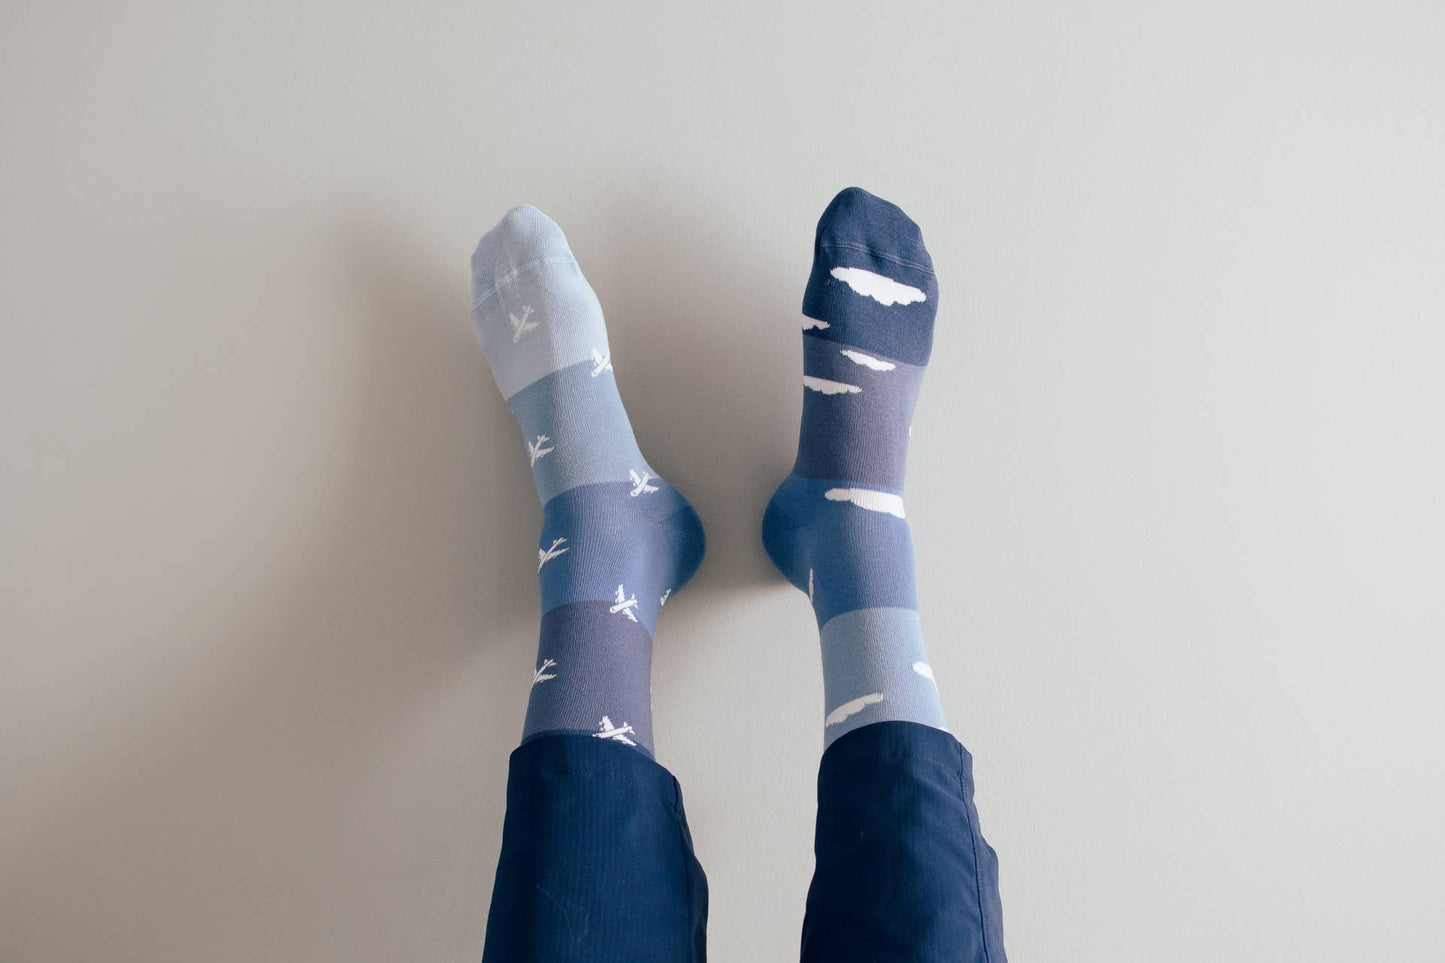 Men’s Socks | Planes & Clouds | Travel | Ethically Made